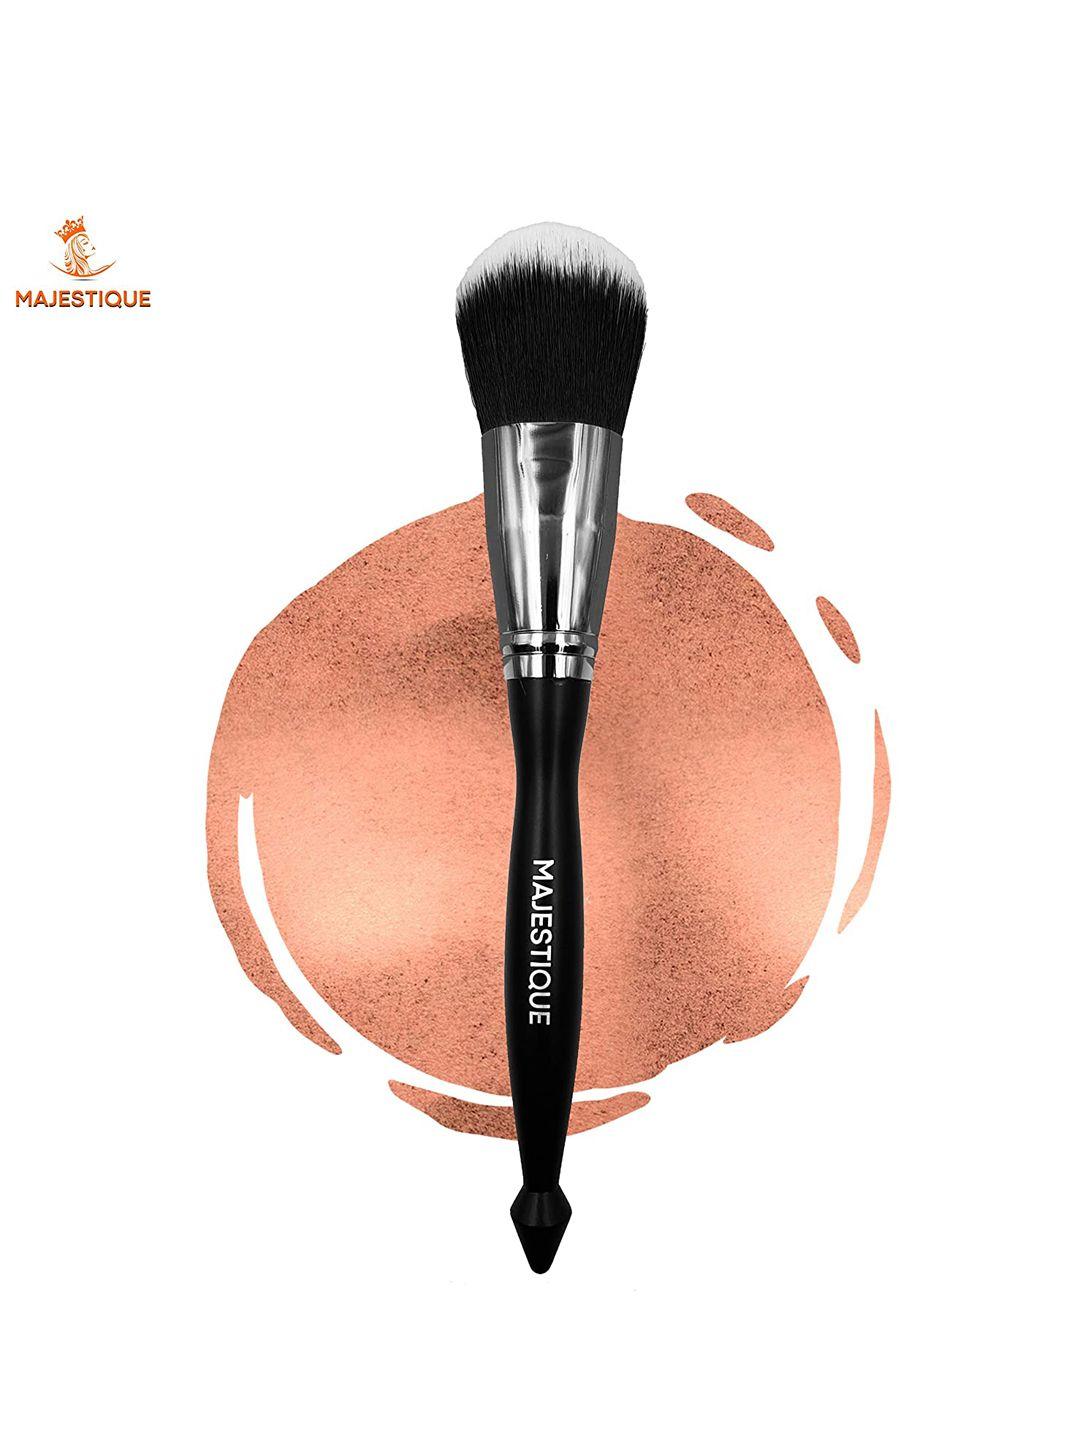 majestique-beauty-highlighter-powder-makeup-brush-with-soft-bristles